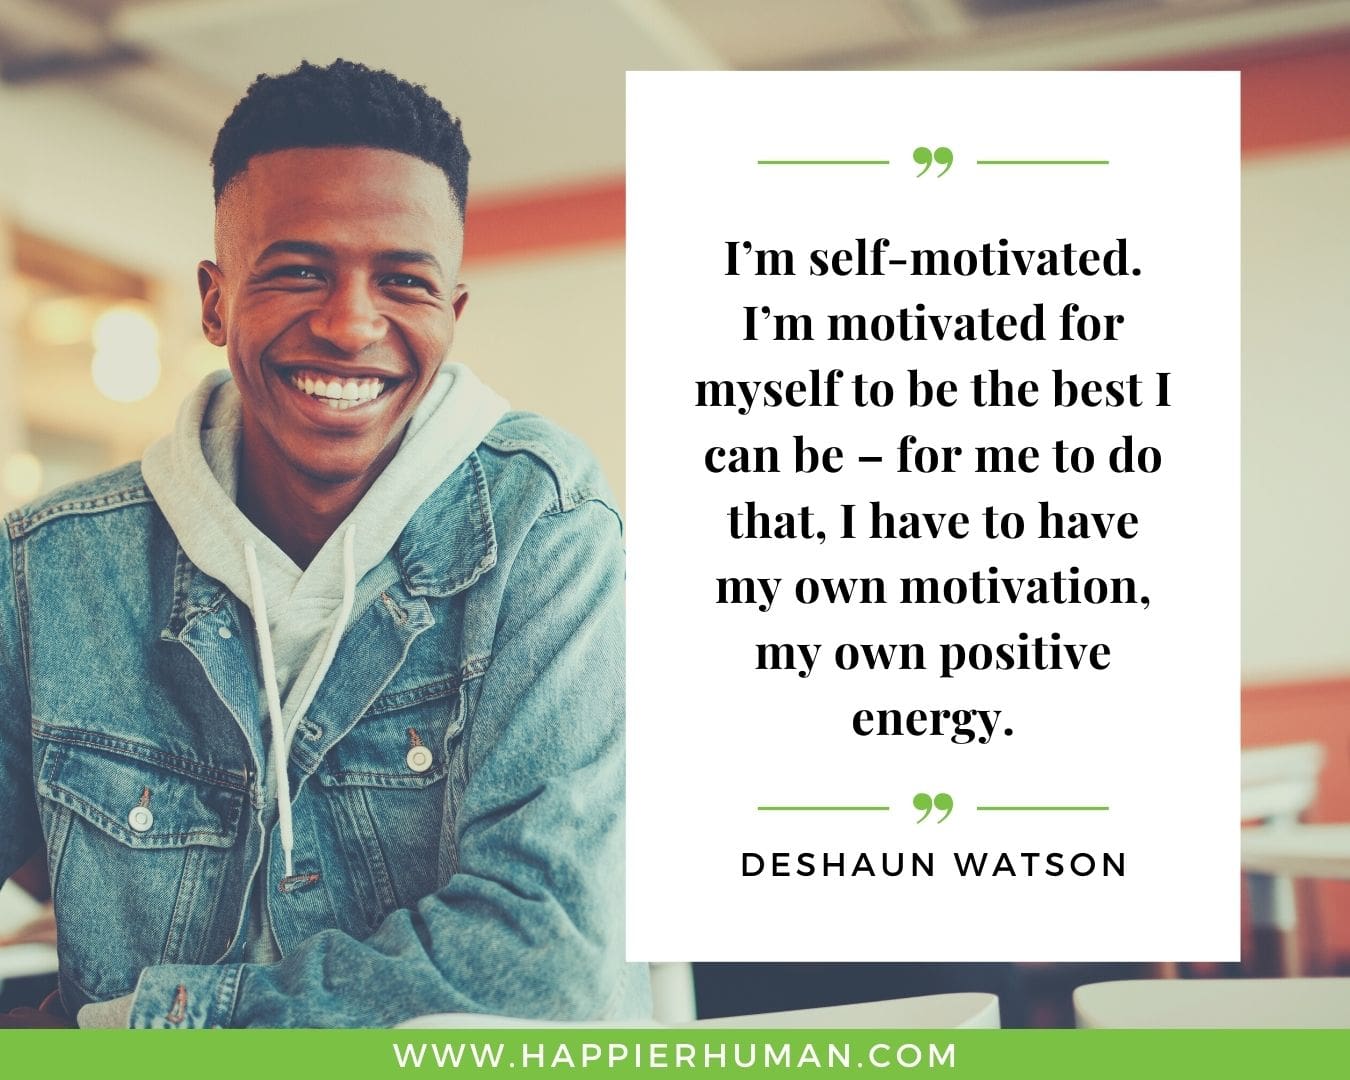 Positive Energy Quotes - “I’m self-motivated. I’m motivated for myself to be the best I can be – for me to do that, I have to have my own motivation, my own positive energy.” - Deshaun Watson